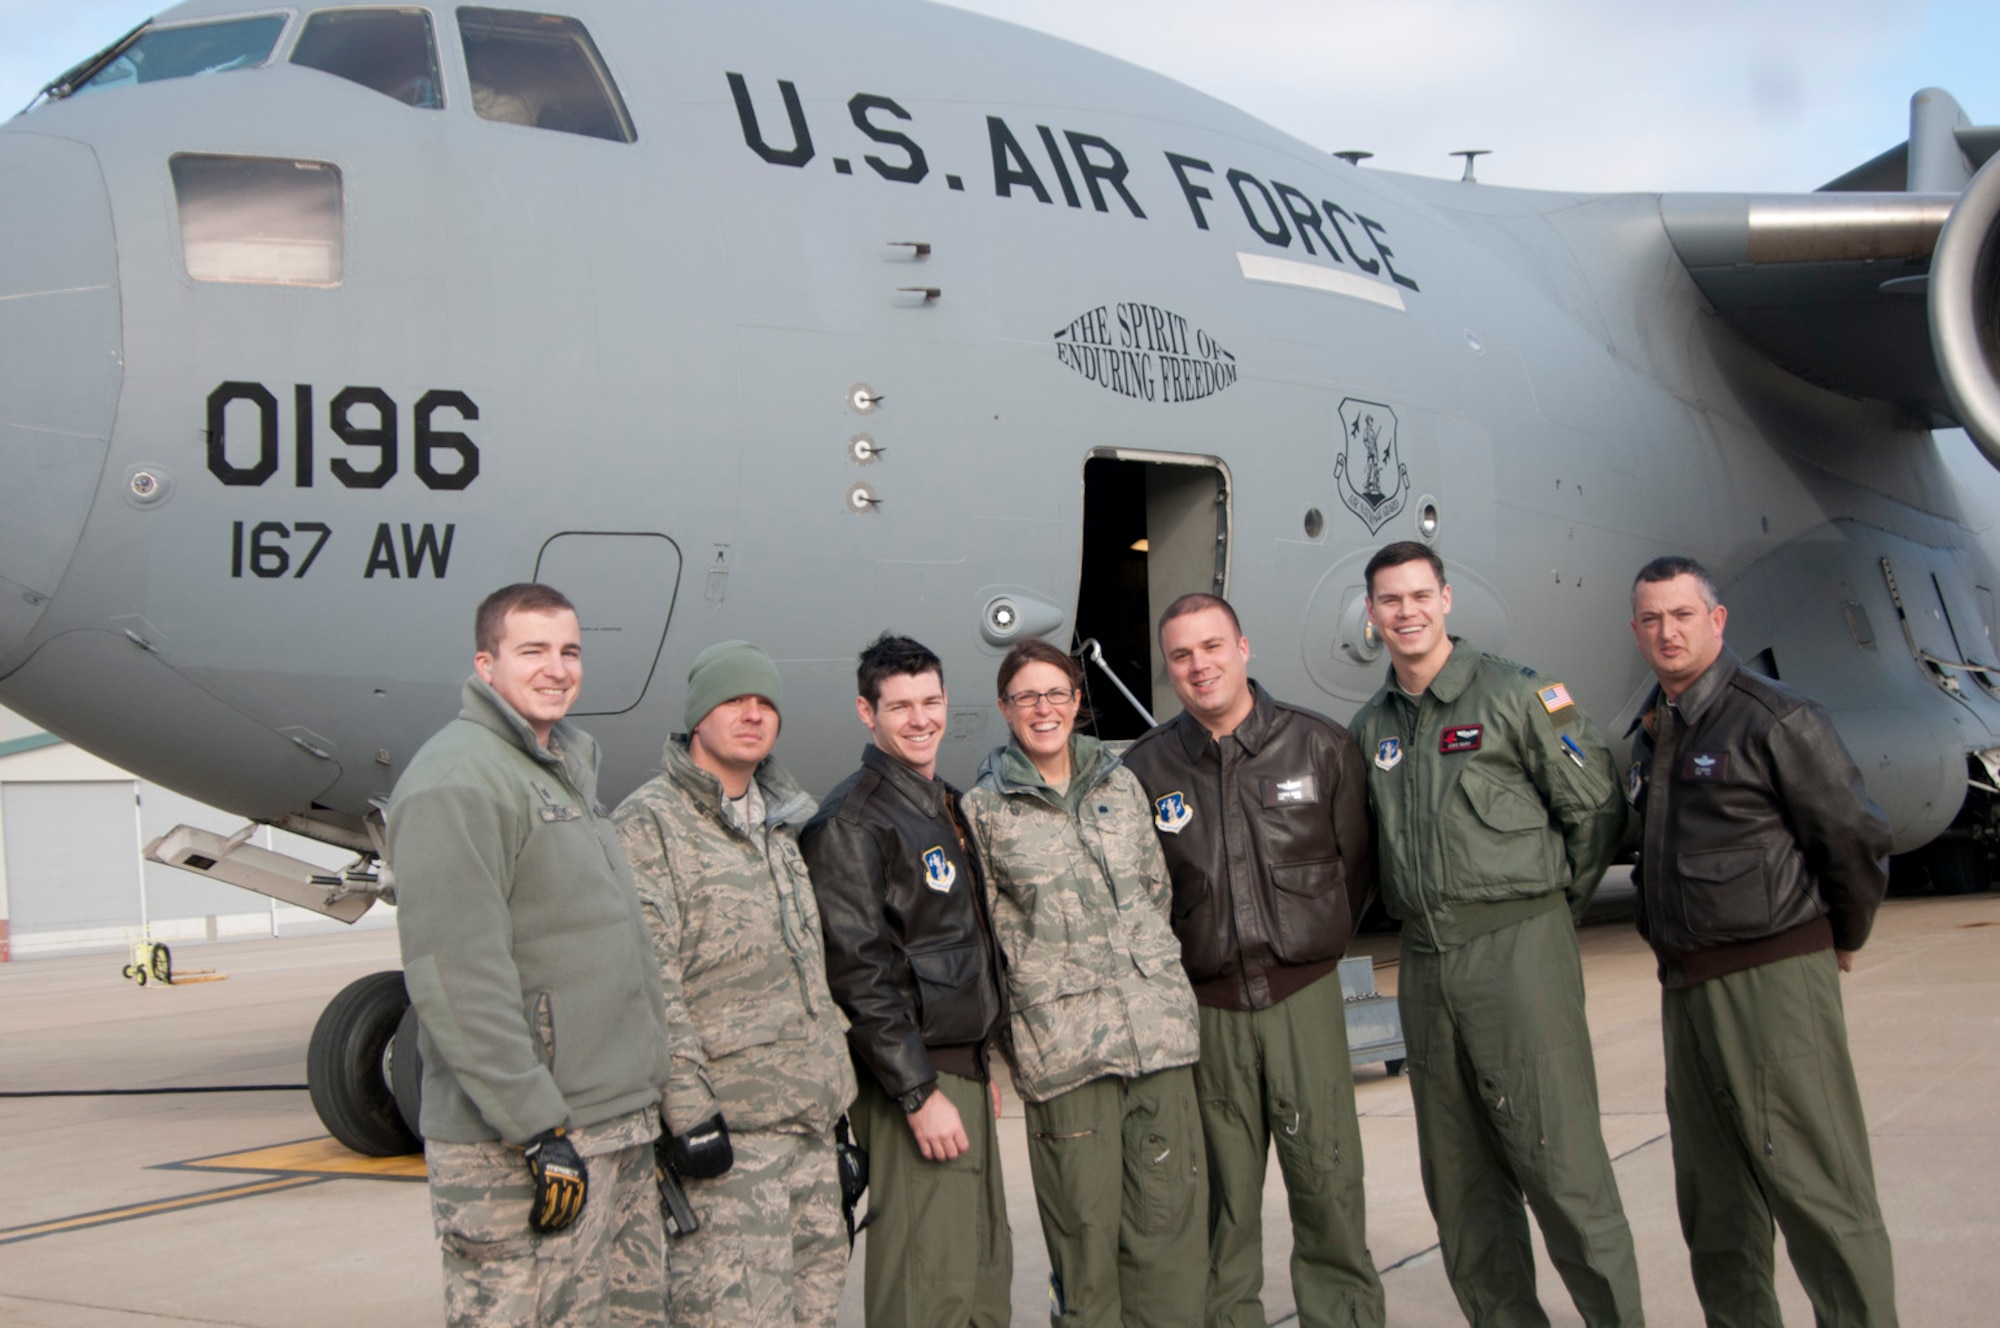 After the first local training sortie of a C-17 at the 167th Airlift Wing, West Virginia Air National Guard base in Martinsburg, W.Va., Dec. 18, ground crew and those aboard the historic flight stand in front of the aircraft. From left to right: Staff Sgt. Mark A. Kelley Jr., Master Sgt. Joseph S. Bosacco, Capt. Justin S. McCabe, Lt. Col. Lisa Windle, Master Sgt. Charles R.D. Moore Capt. Christopher K. Nary and Chief Master Sgt. Leslie Y. Morris.  (Air National Guard photo by Staff Sgt. Sherree Grebenstein/released)